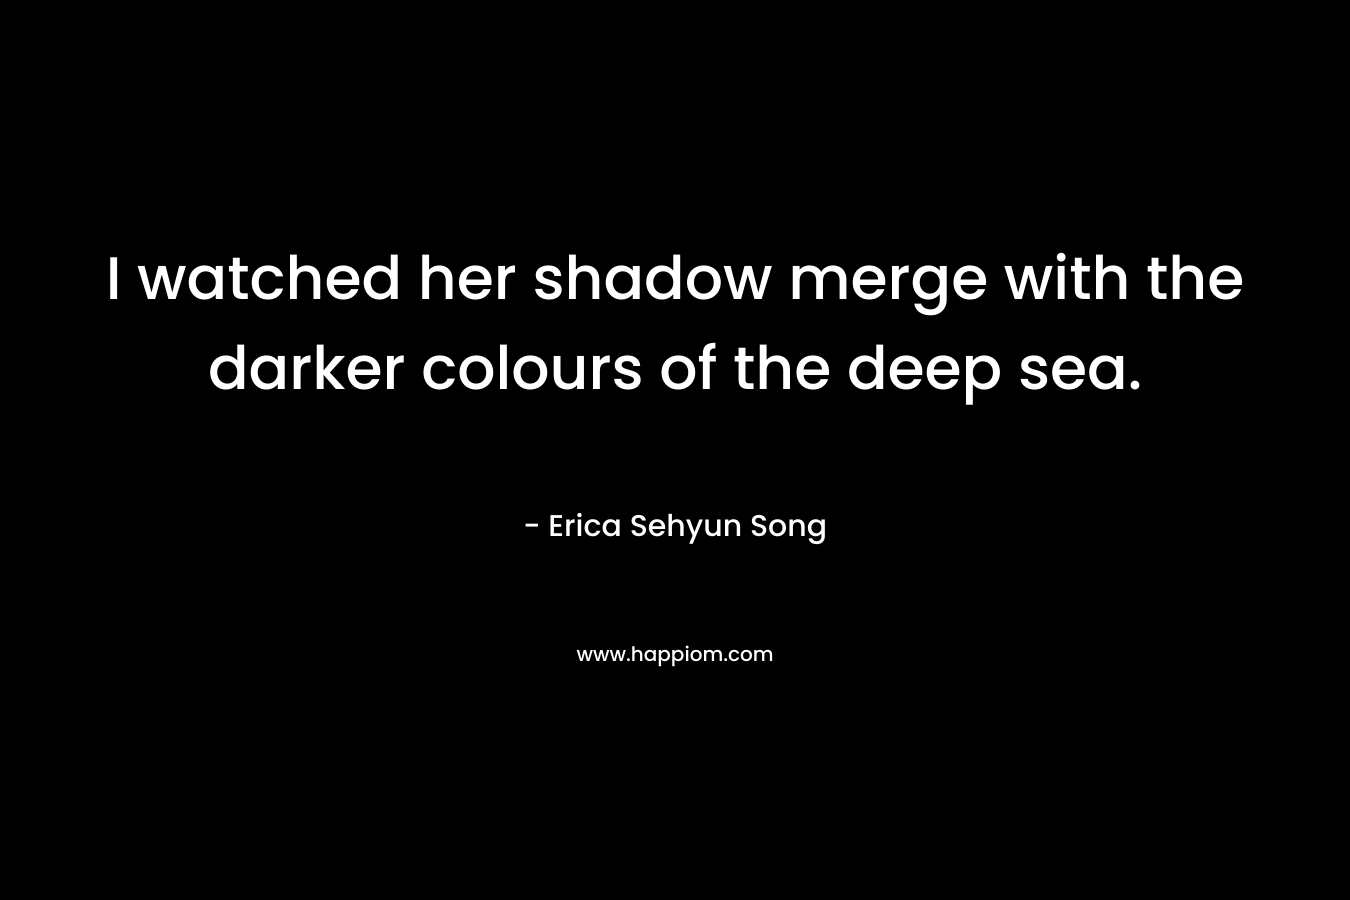 I watched her shadow merge with the darker colours of the deep sea.